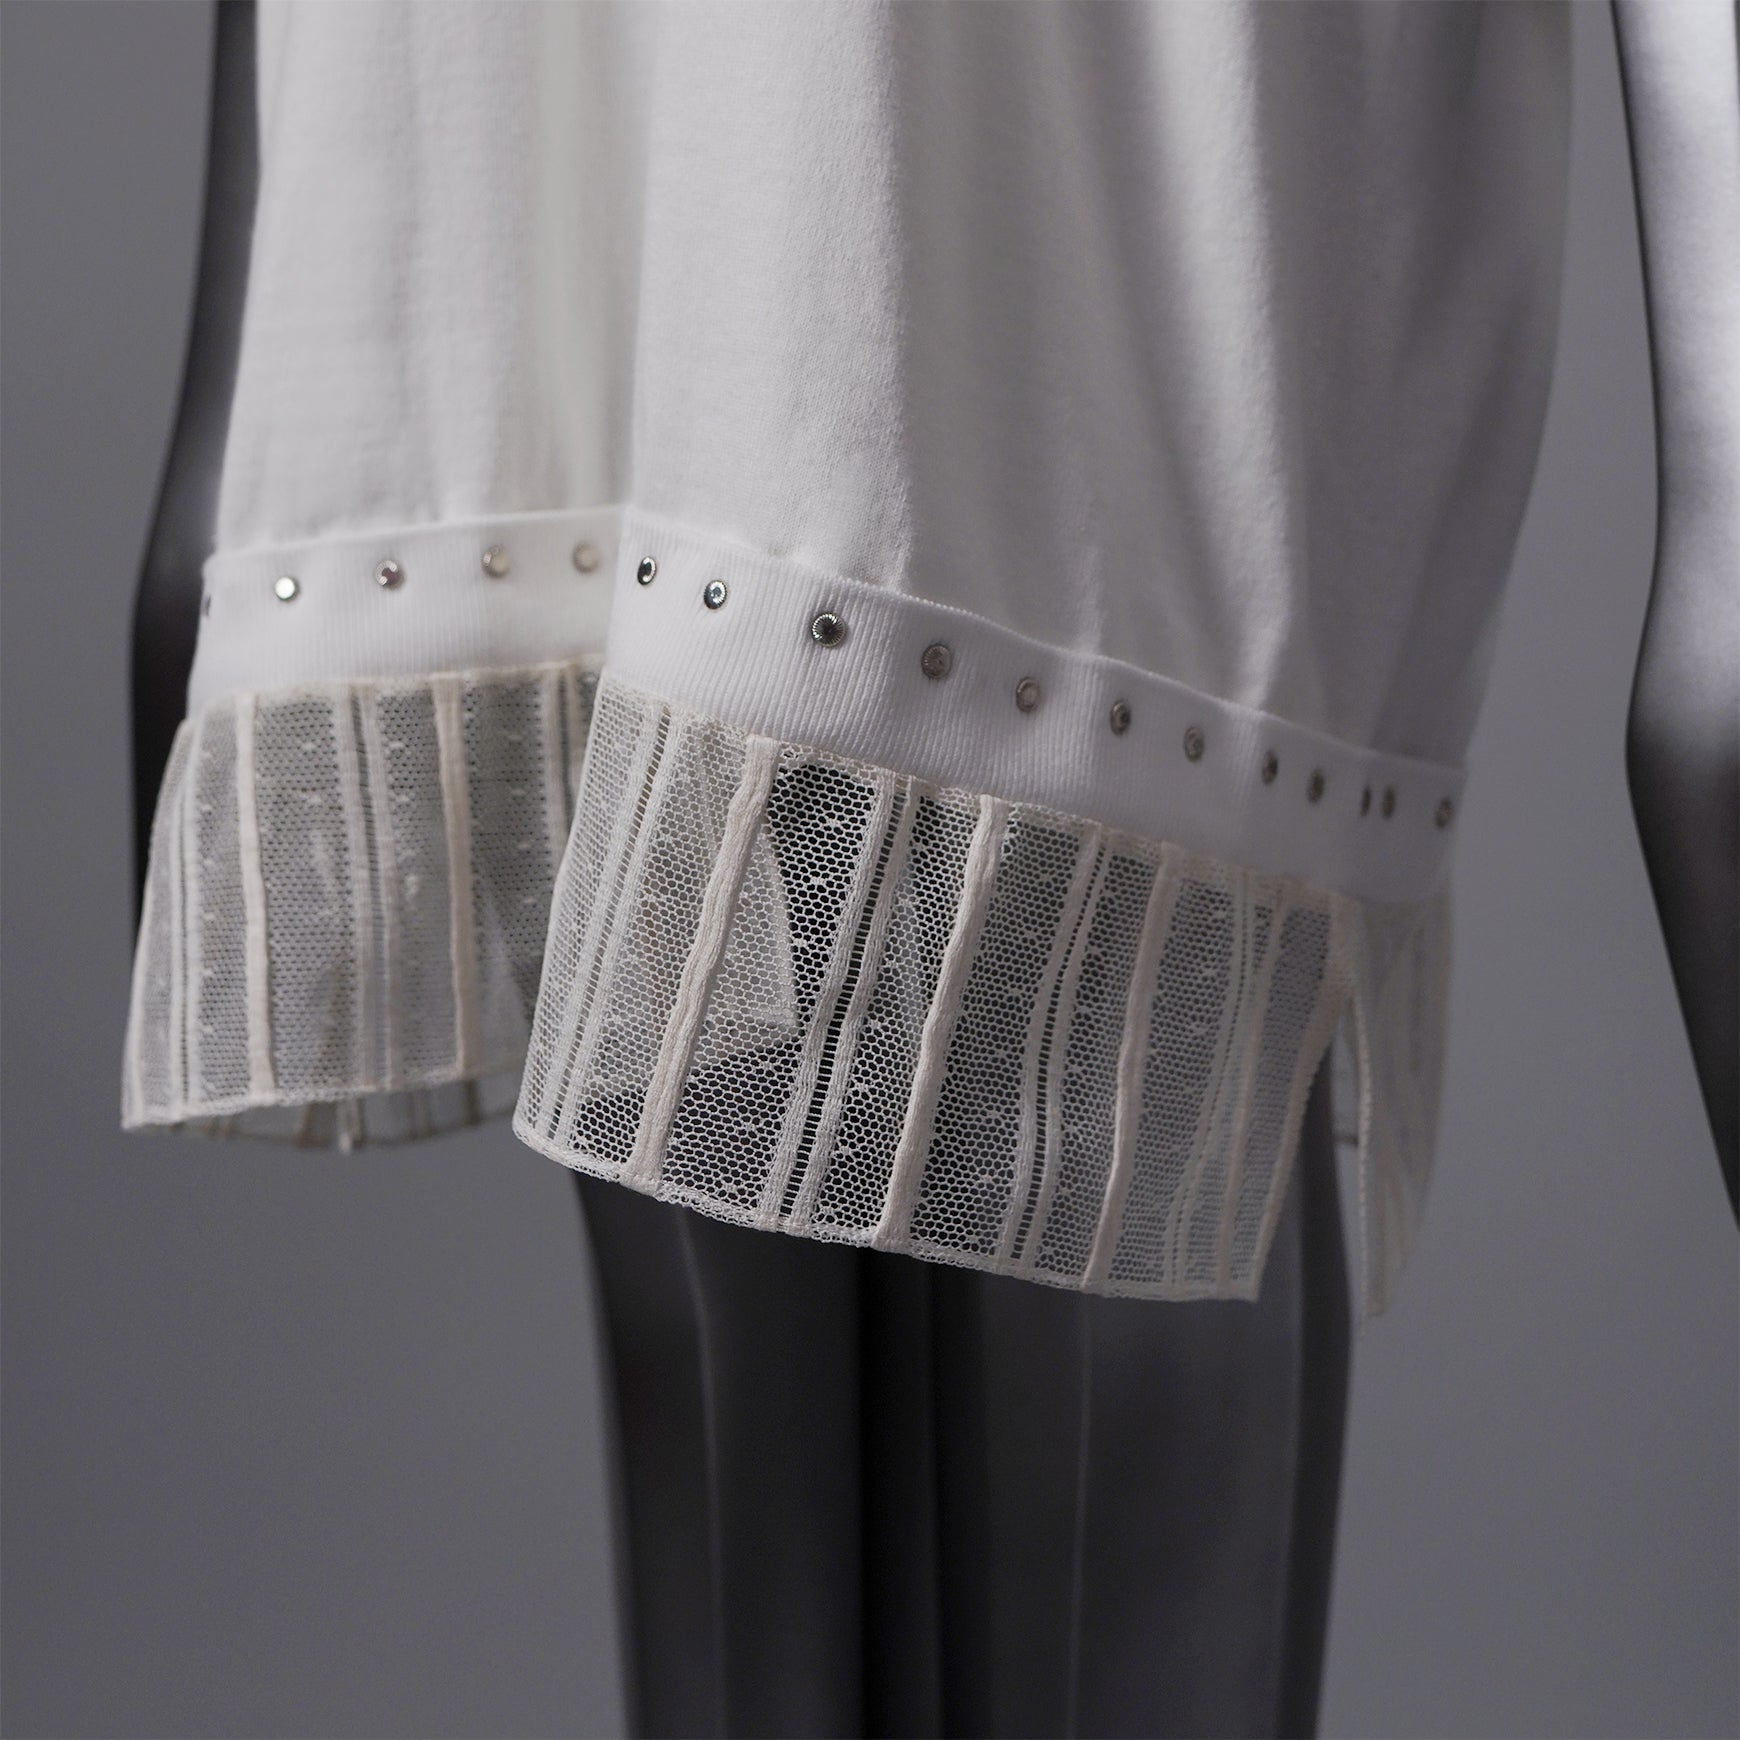 TYPE-1 Knit Organic Cotton Half Sleeves with French Lace Sleeve Parts Short (White Stripes)